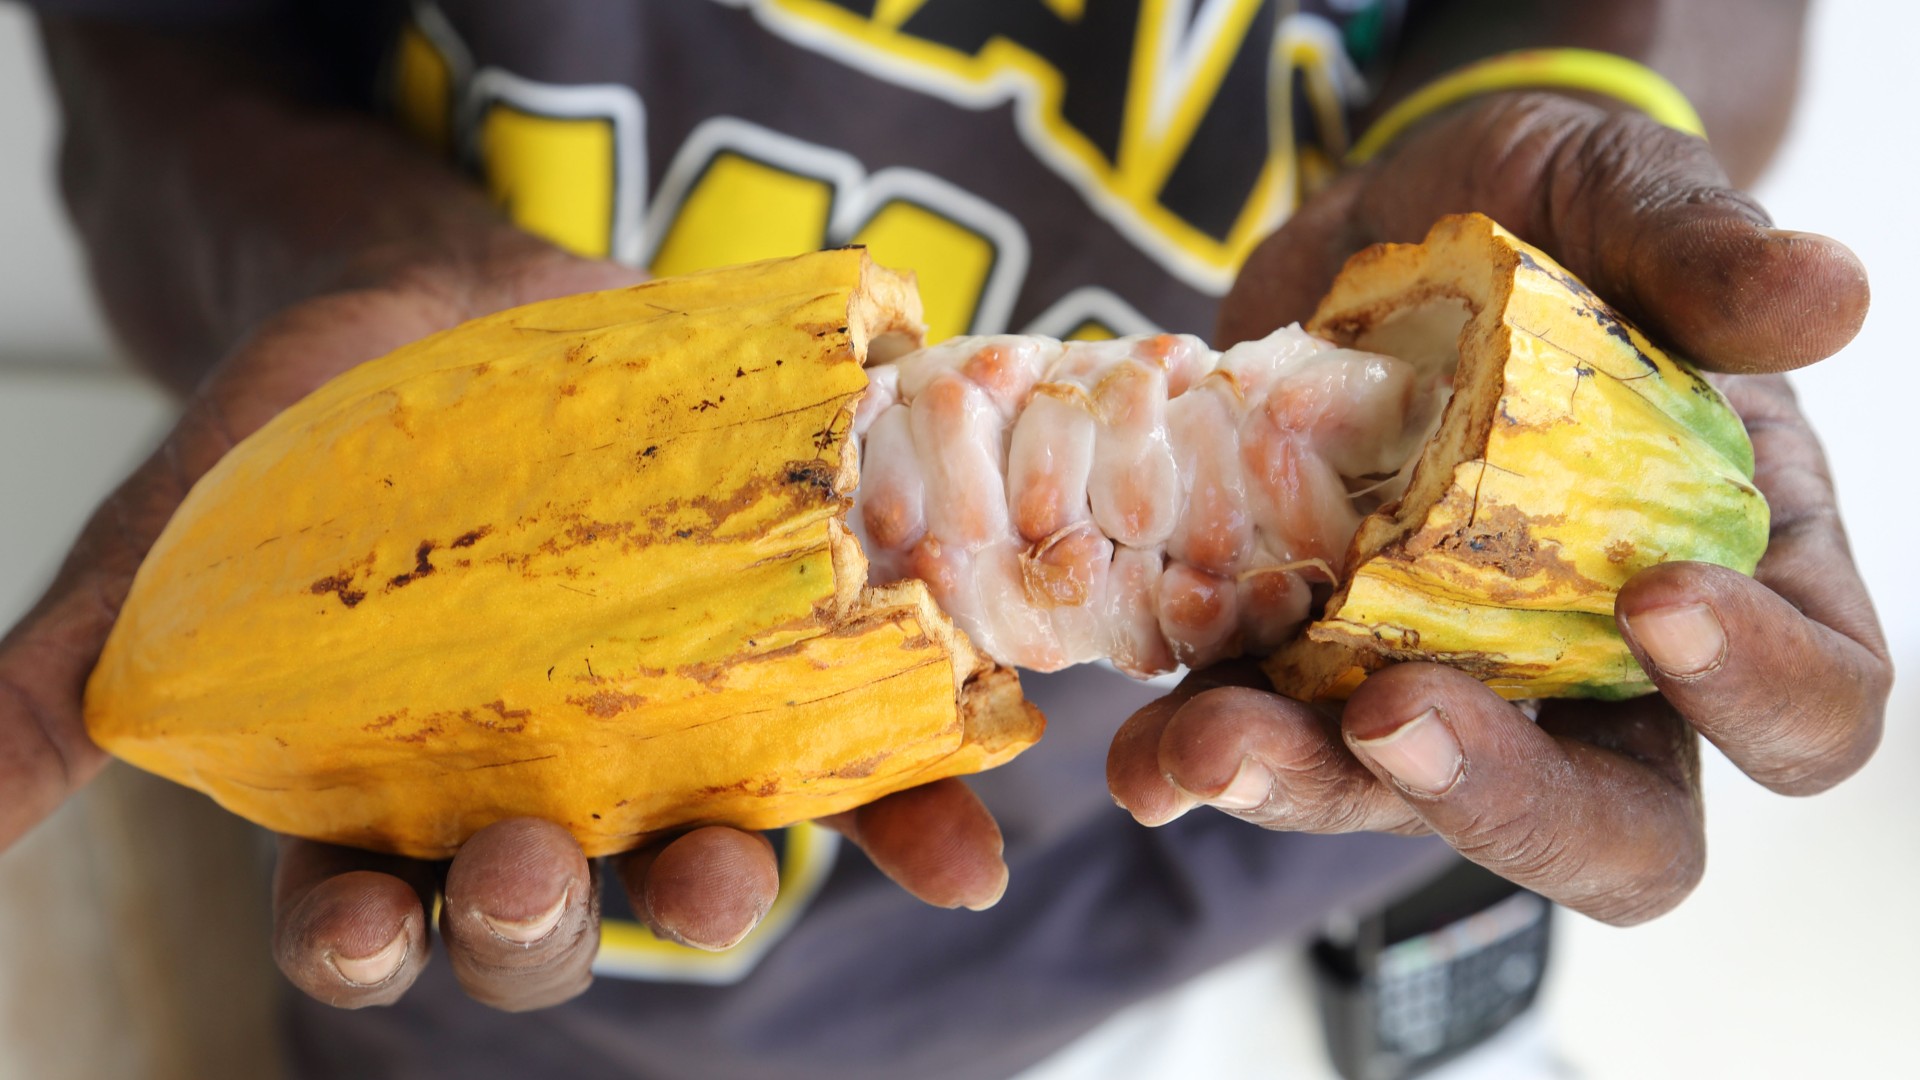 Local man holding fresh opened cacao pod with cocoa bean pulp inside.